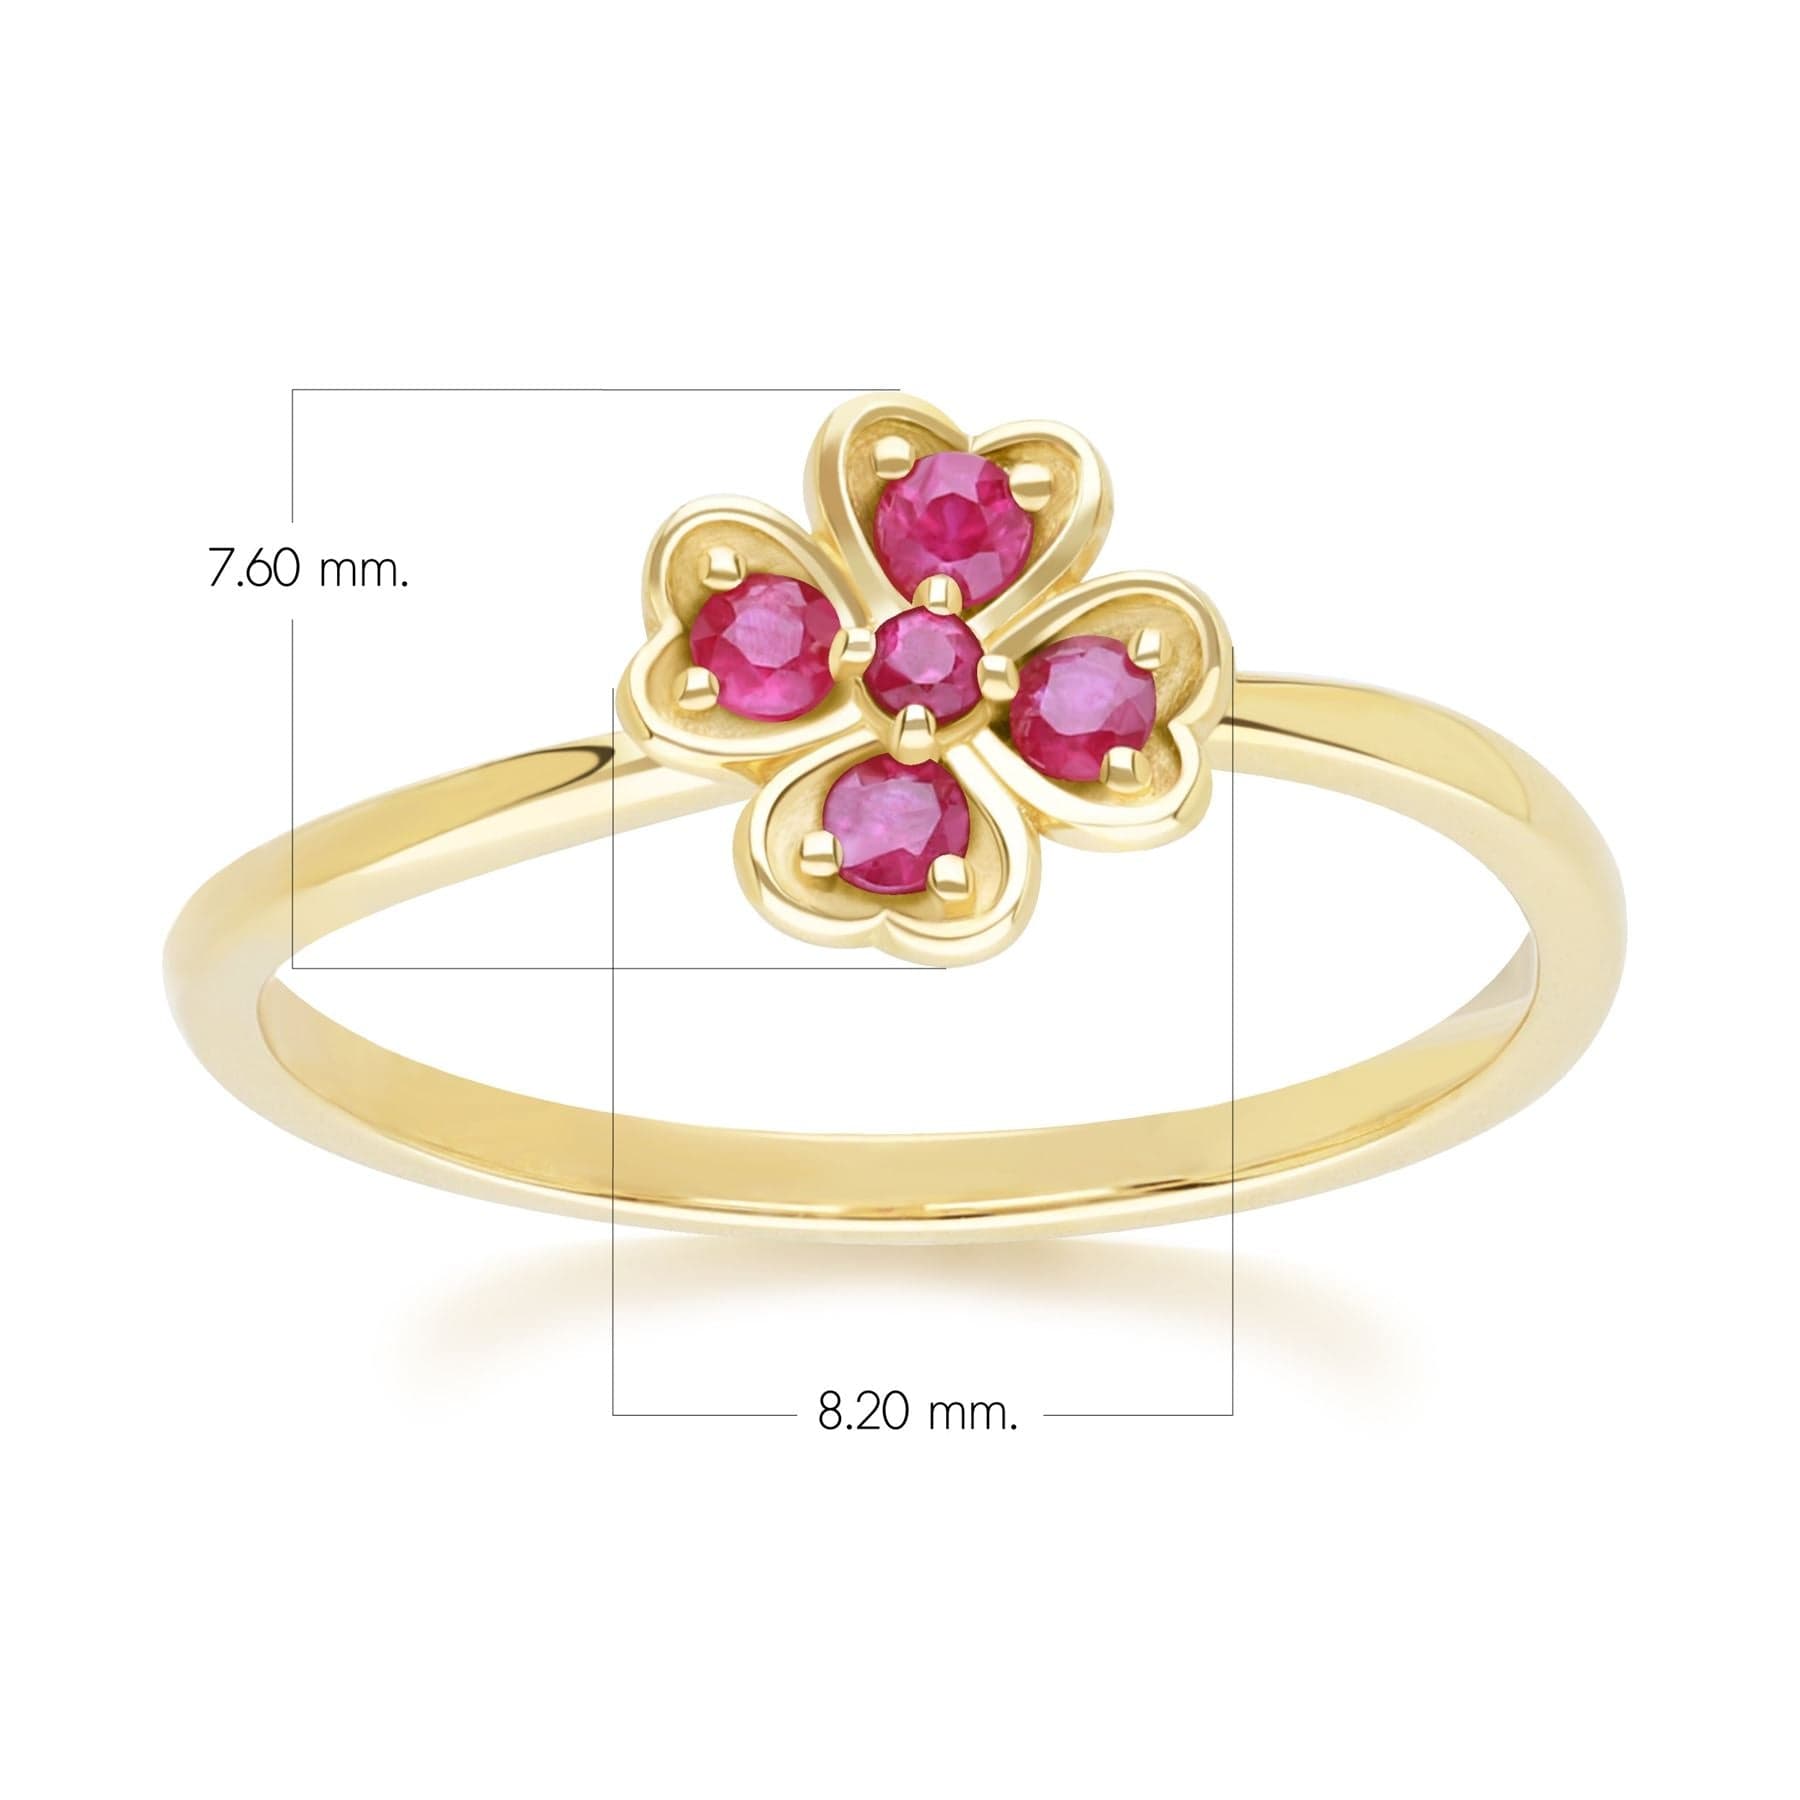 135R2102019 Gardenia Round Ruby Clover Ring in 9ct Yellow Gold Dimensions